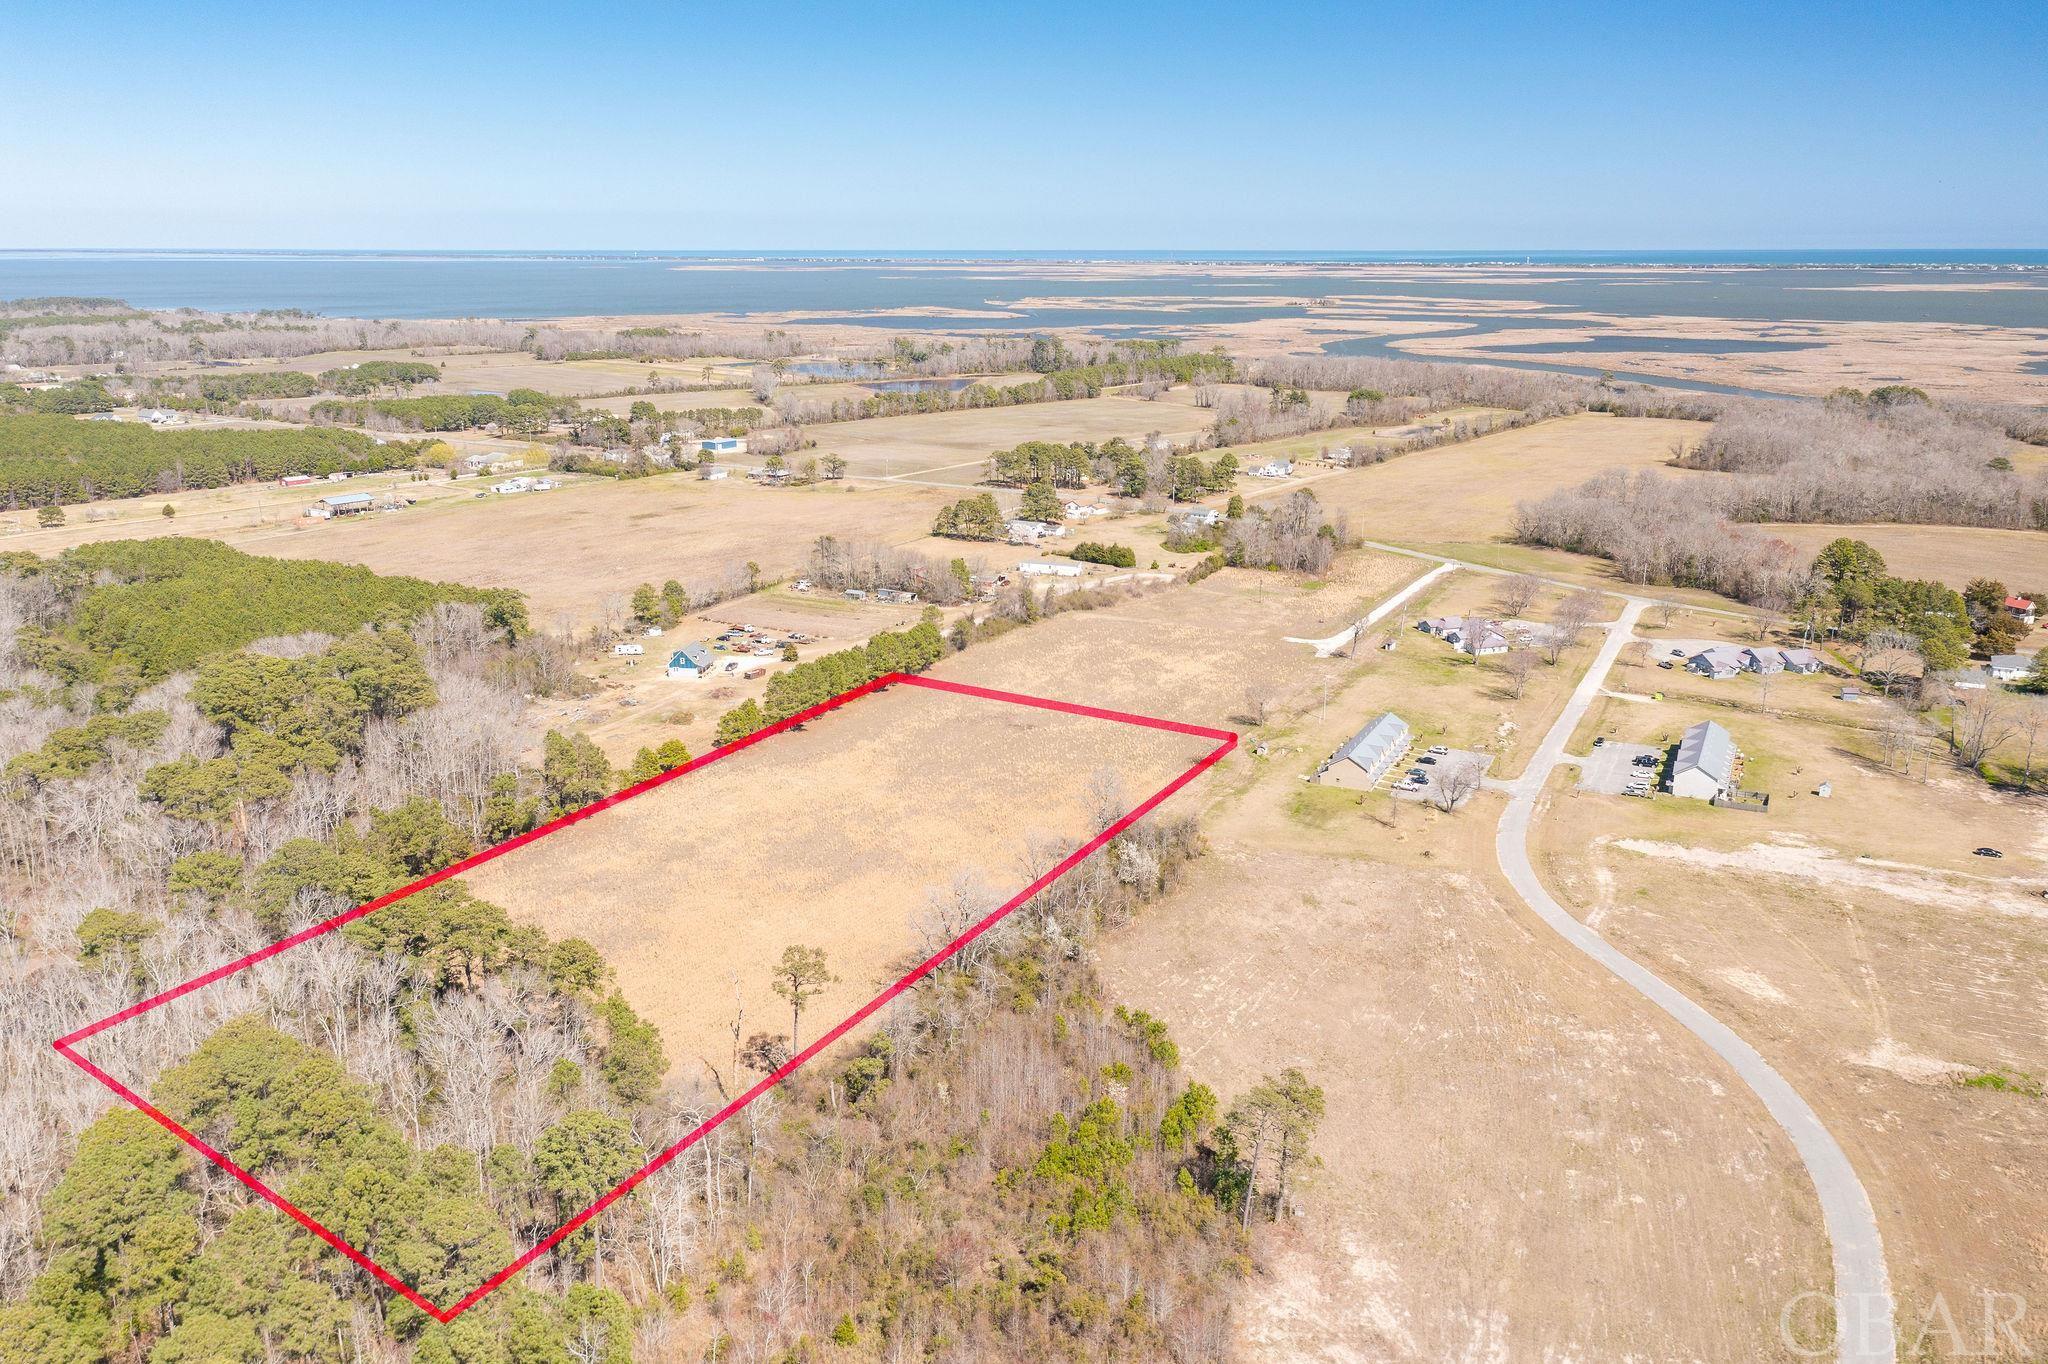 8 Acres, cleared in Lower Currituck. Looking for a spot to lay a few roots down and let them grow? Look no further. With four (8) acres to spread out, this space has so many possibilities. With no HOA and no HOA fees (or HOA restrictions), you have the freedom to make this property your own private oasis. Centrally located within Currituck yet just a very short drive to the Outer Banks. Grocery shopping is located within miles but you can still enjoy a slower paced lifestyle on the backroads.